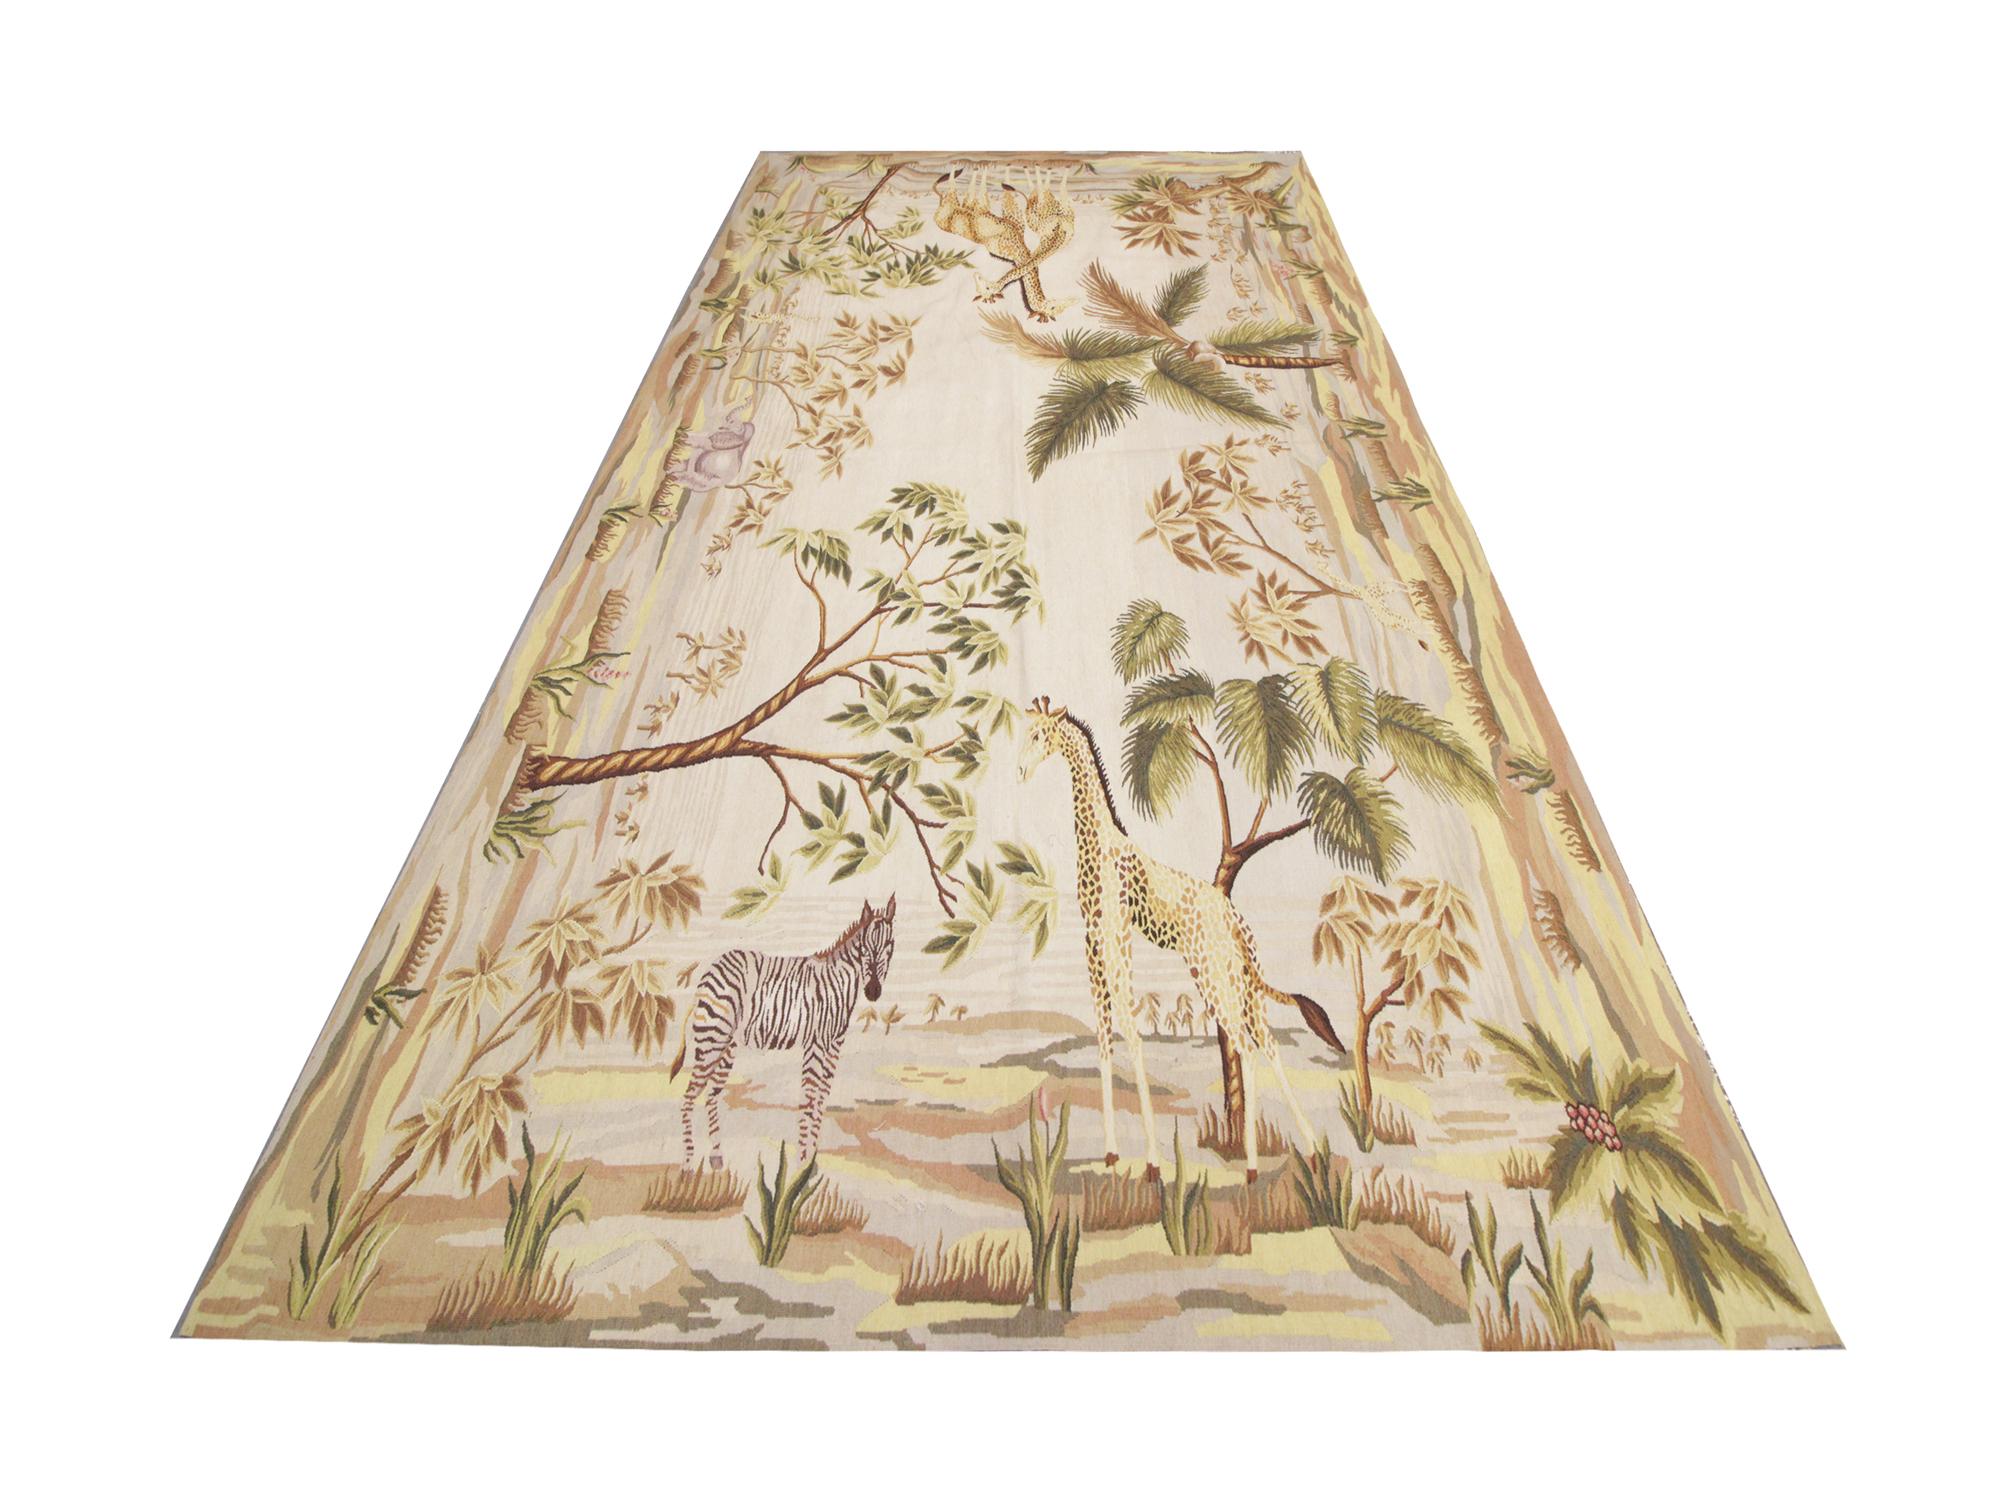 Upgrade your interior walls or floors with this high-quality vintage Aubusson rug style tapestry, handwoven in 1940 with hand-spun, vegetable-dyed wool and cotton, woven by some of the finest artisans. Perfect for any modern or traditional